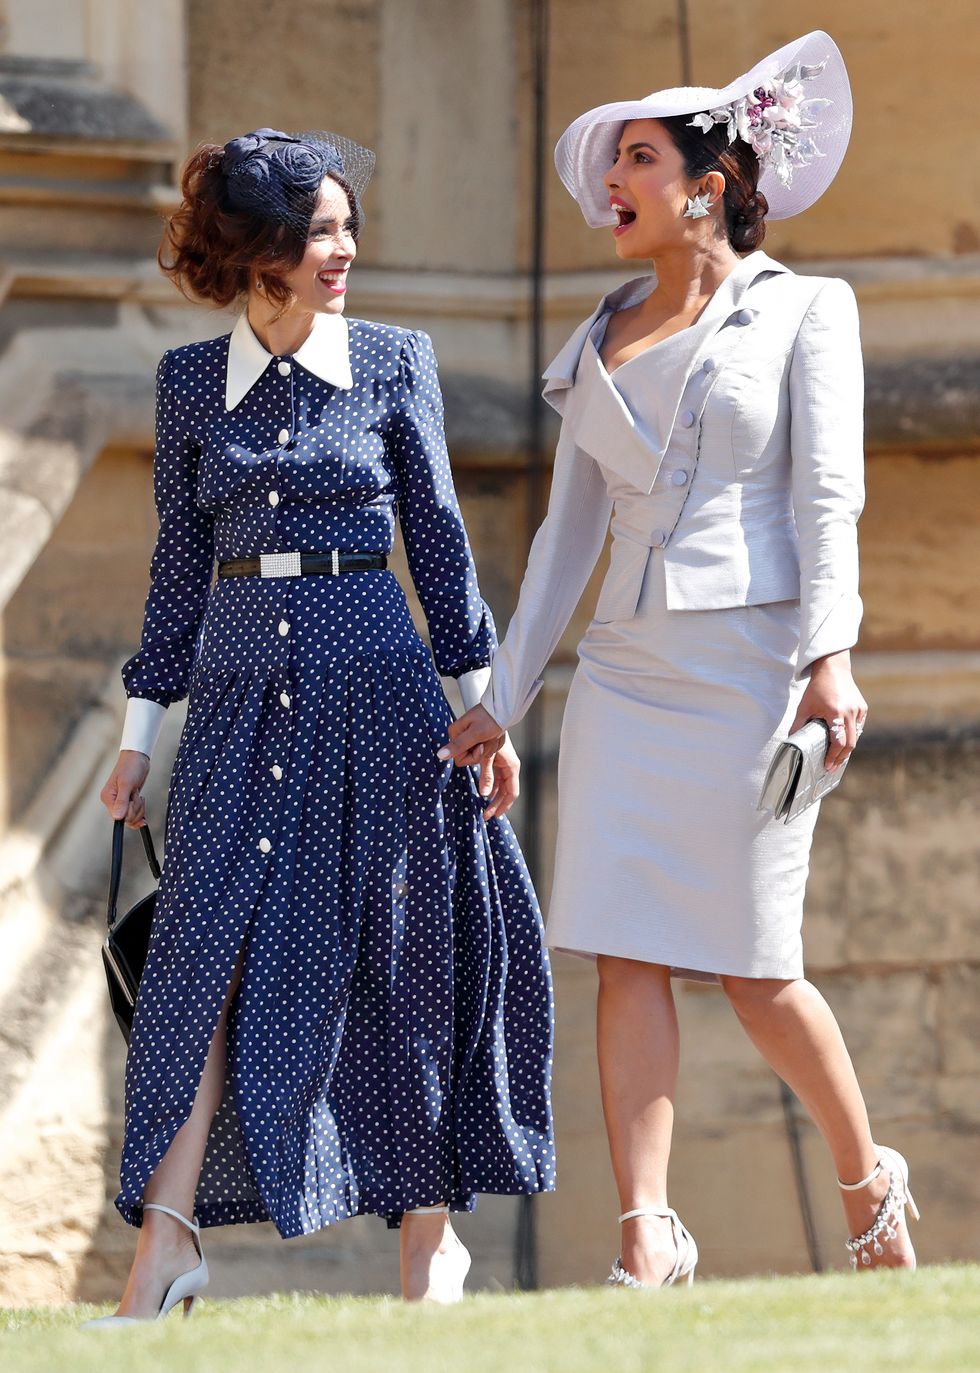 windsor, united kingdom may 19 embargoed for publication in uk newspapers until 24 hours after create date and time abigail spencer and priyanka chopra attend the wedding of prince harry to ms meghan markle at st georges chapel, windsor castle on may 19, 2018 in windsor, england prince henry charles albert david of wales marries ms meghan markle in a service at st georges chapel inside the grounds of windsor castle among the guests were 2200 members of the public, the royal family and ms markles mother doria ragland photo by max mumbyindigogetty images